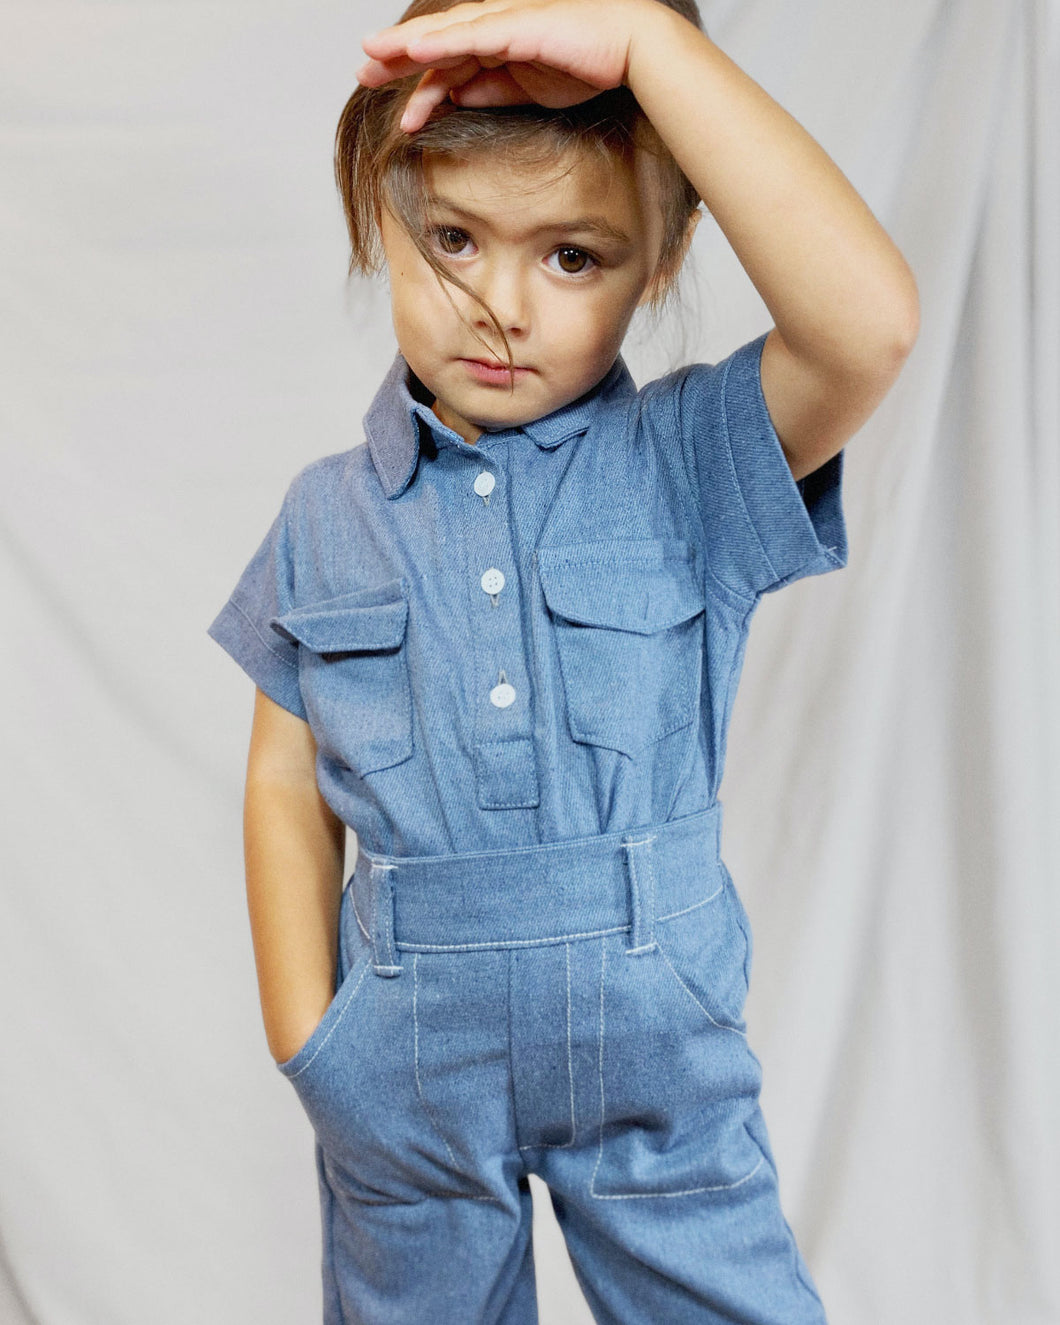 The Two pieces denim set is unisex perfect for toddlers and kids. Jumpsuit looking 